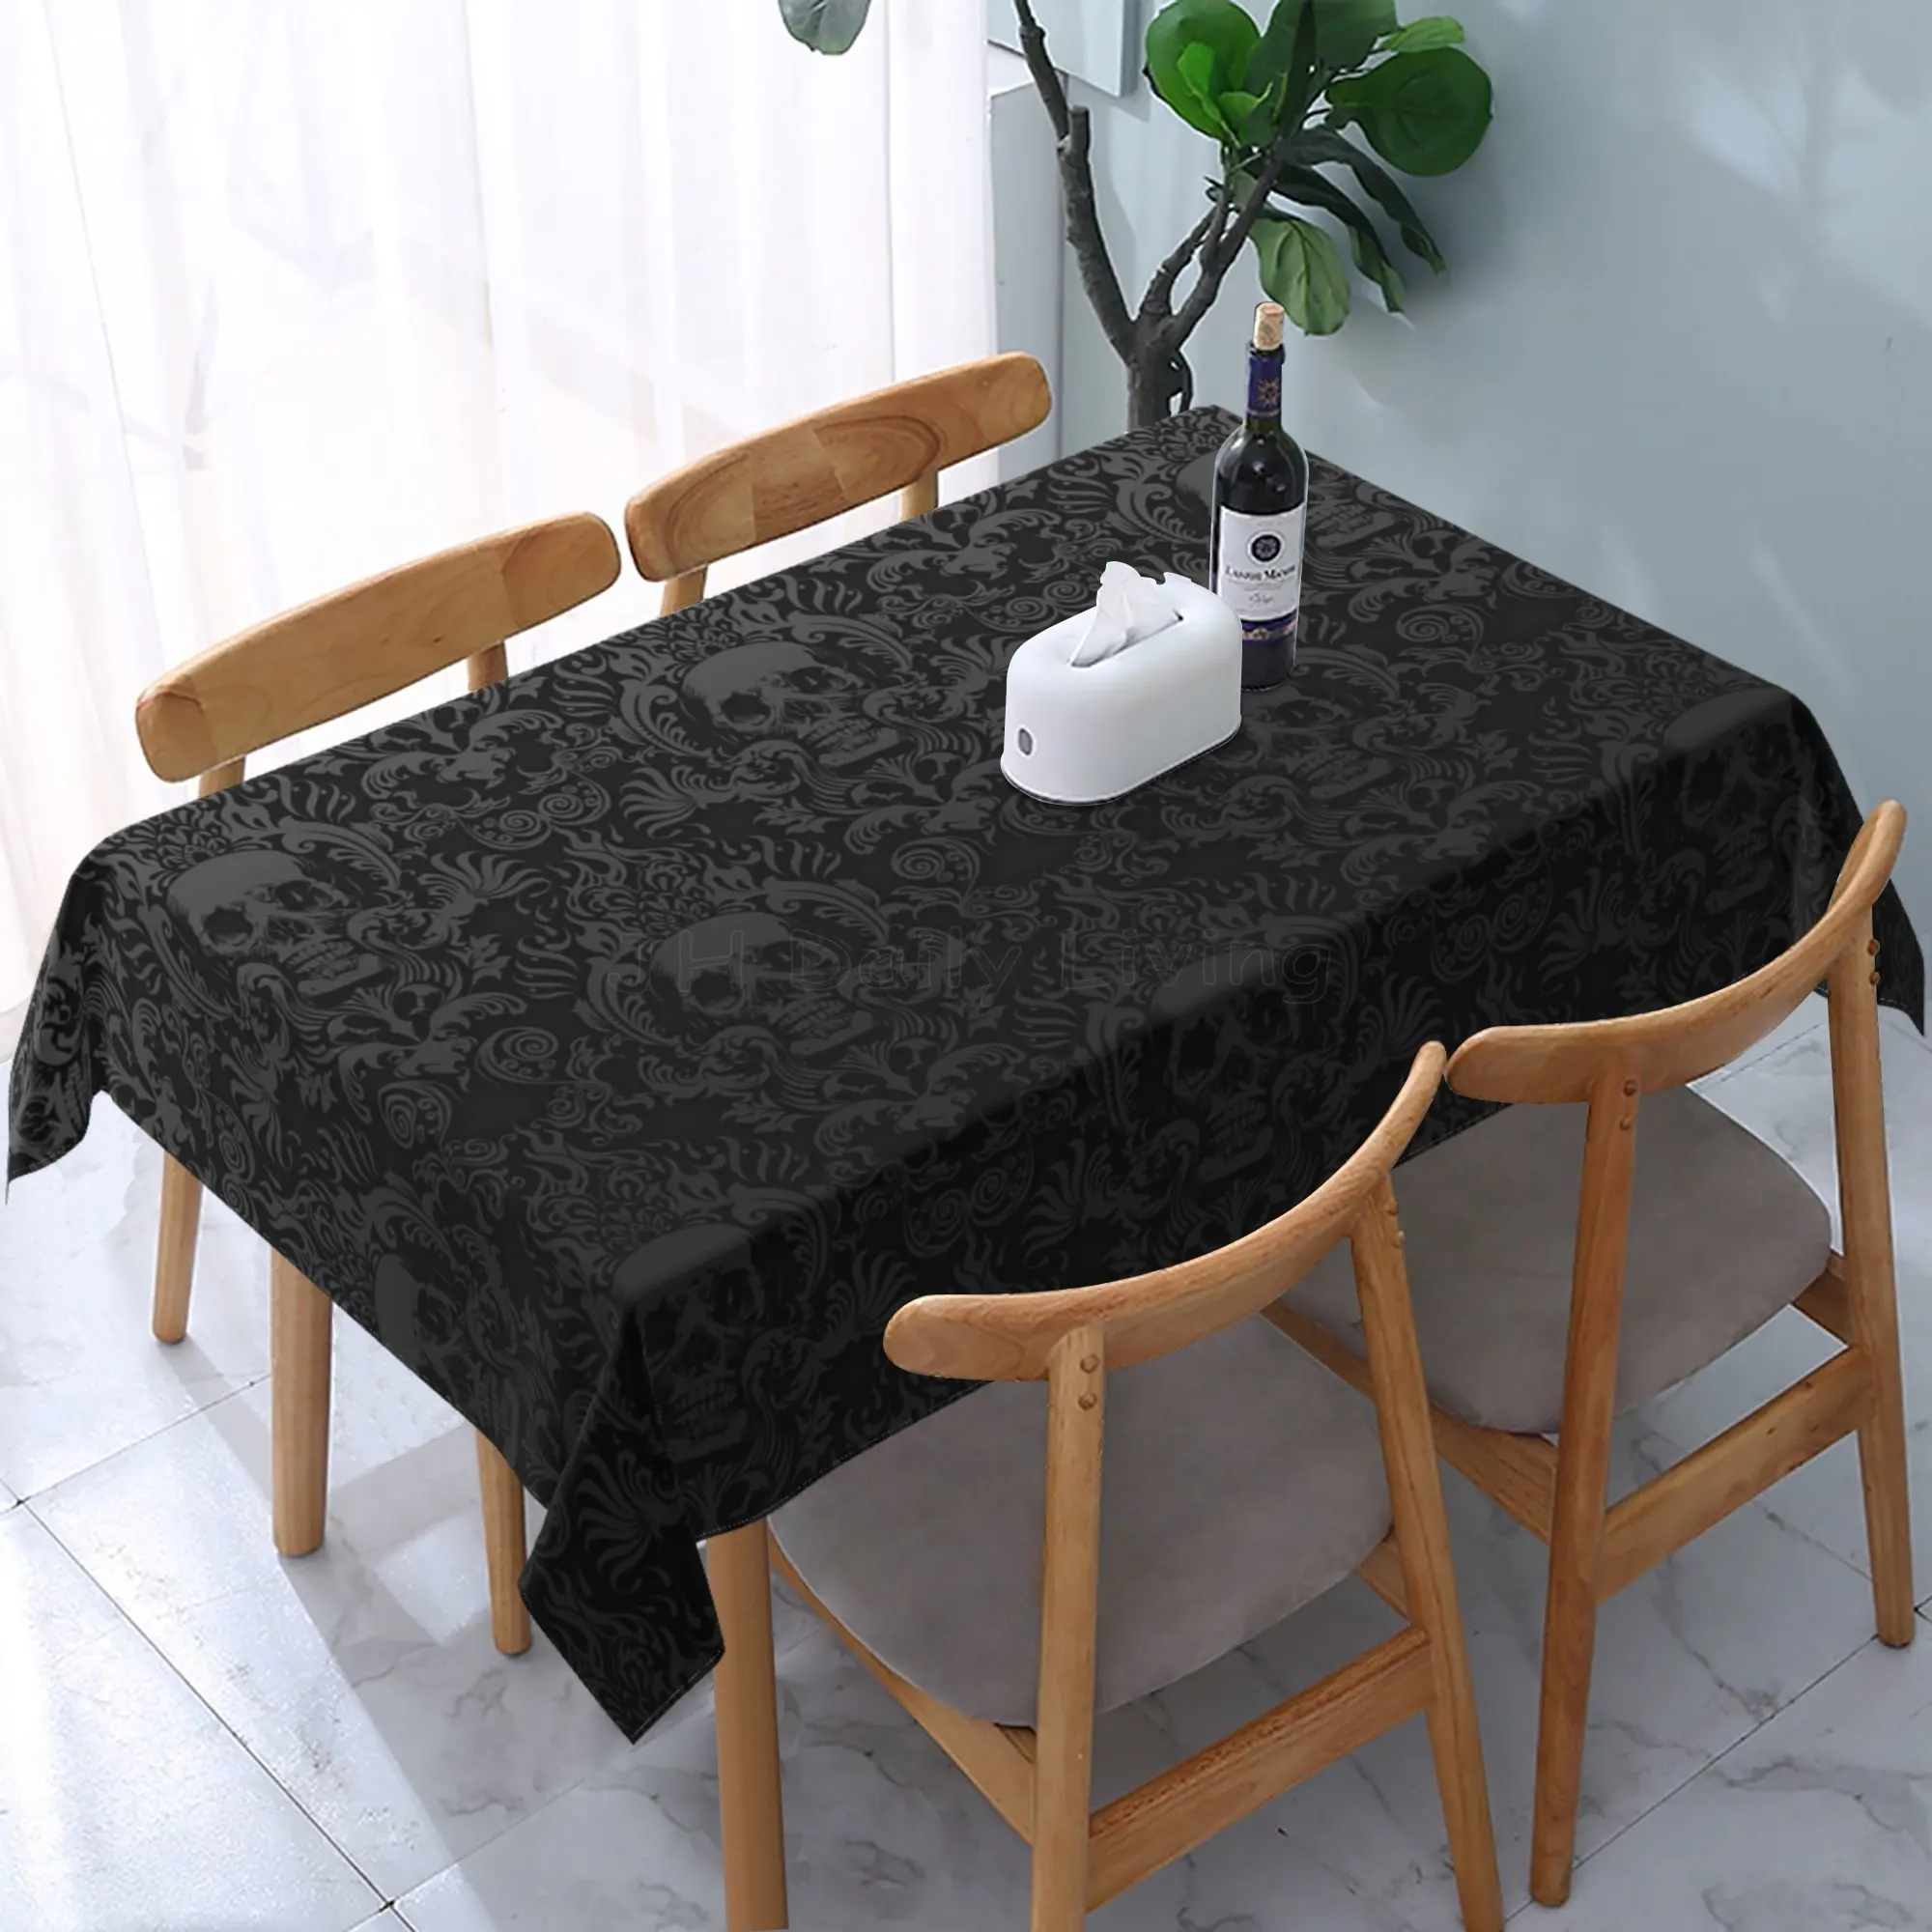 

Gothic Skull Flower Black Rectangle Tablecloth Washable Polyester Table Cloth Cover for Kitchen Party Picnic Dining Decor